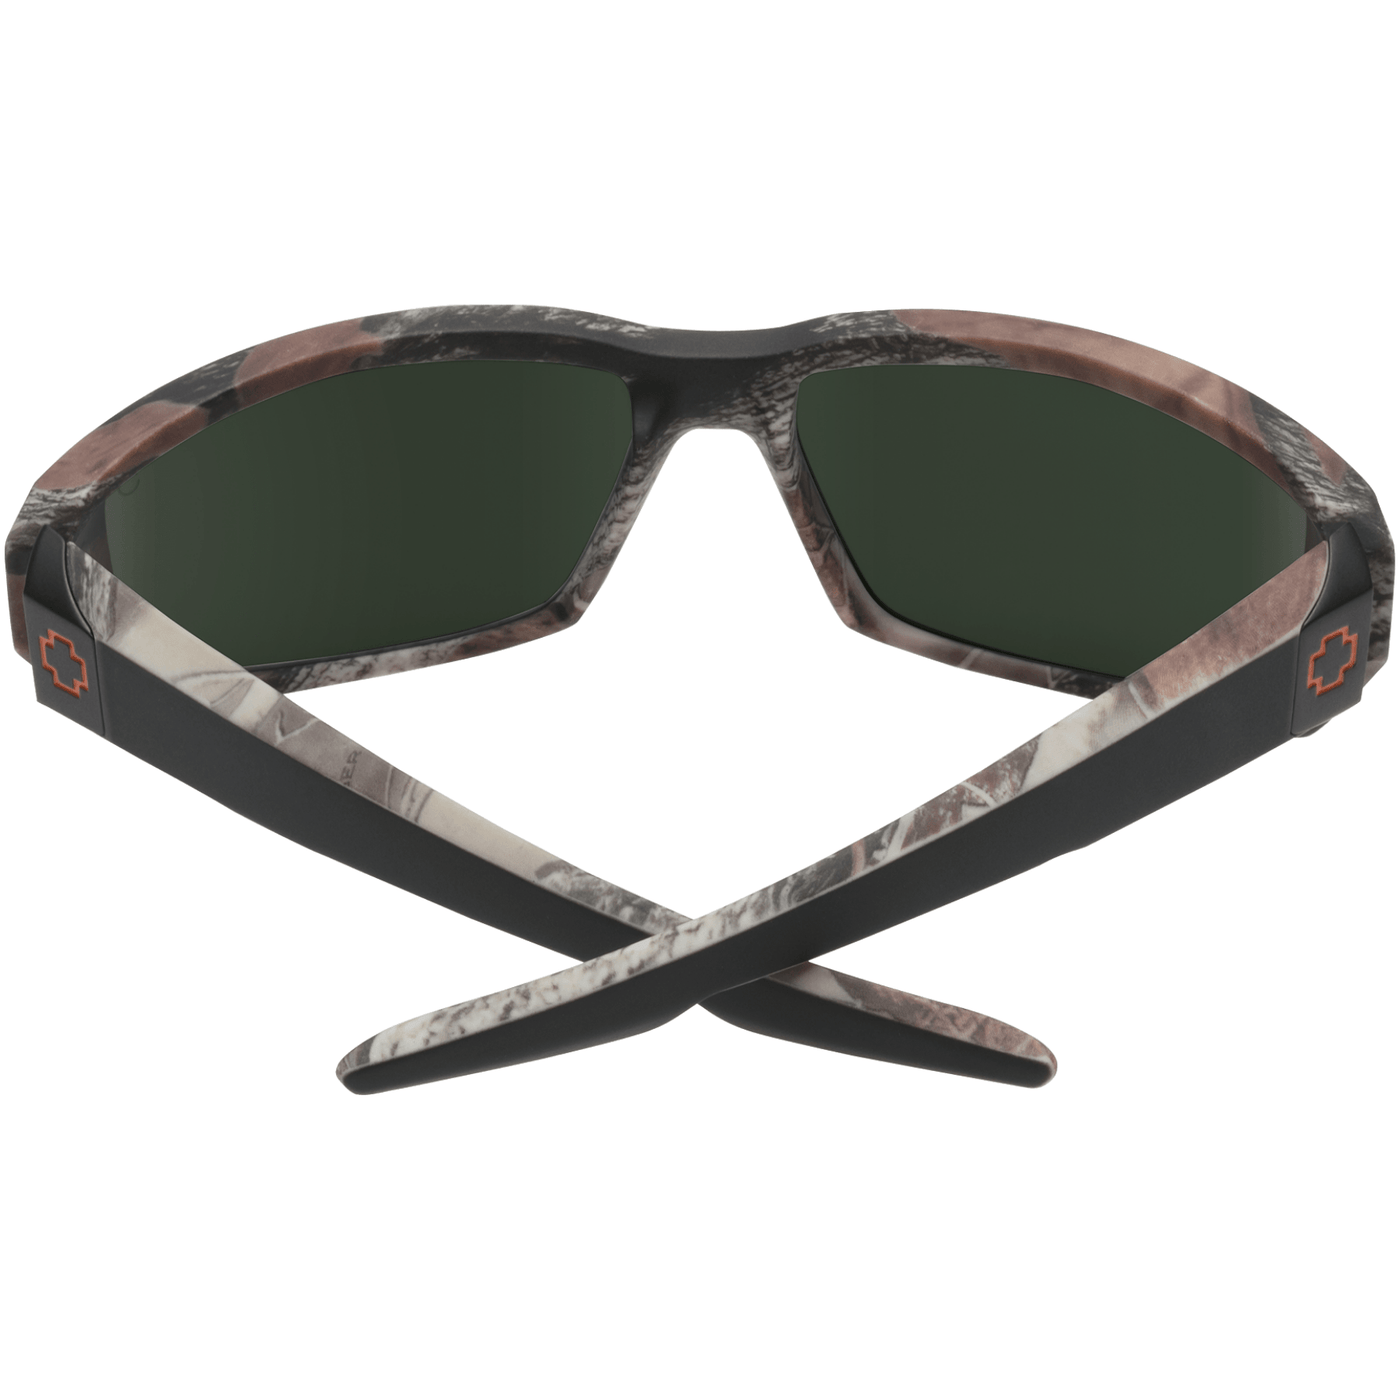 SPY DIRTY MO Polarized Sunglasses - Gray/Green 8Lines Shop - Fast Shipping